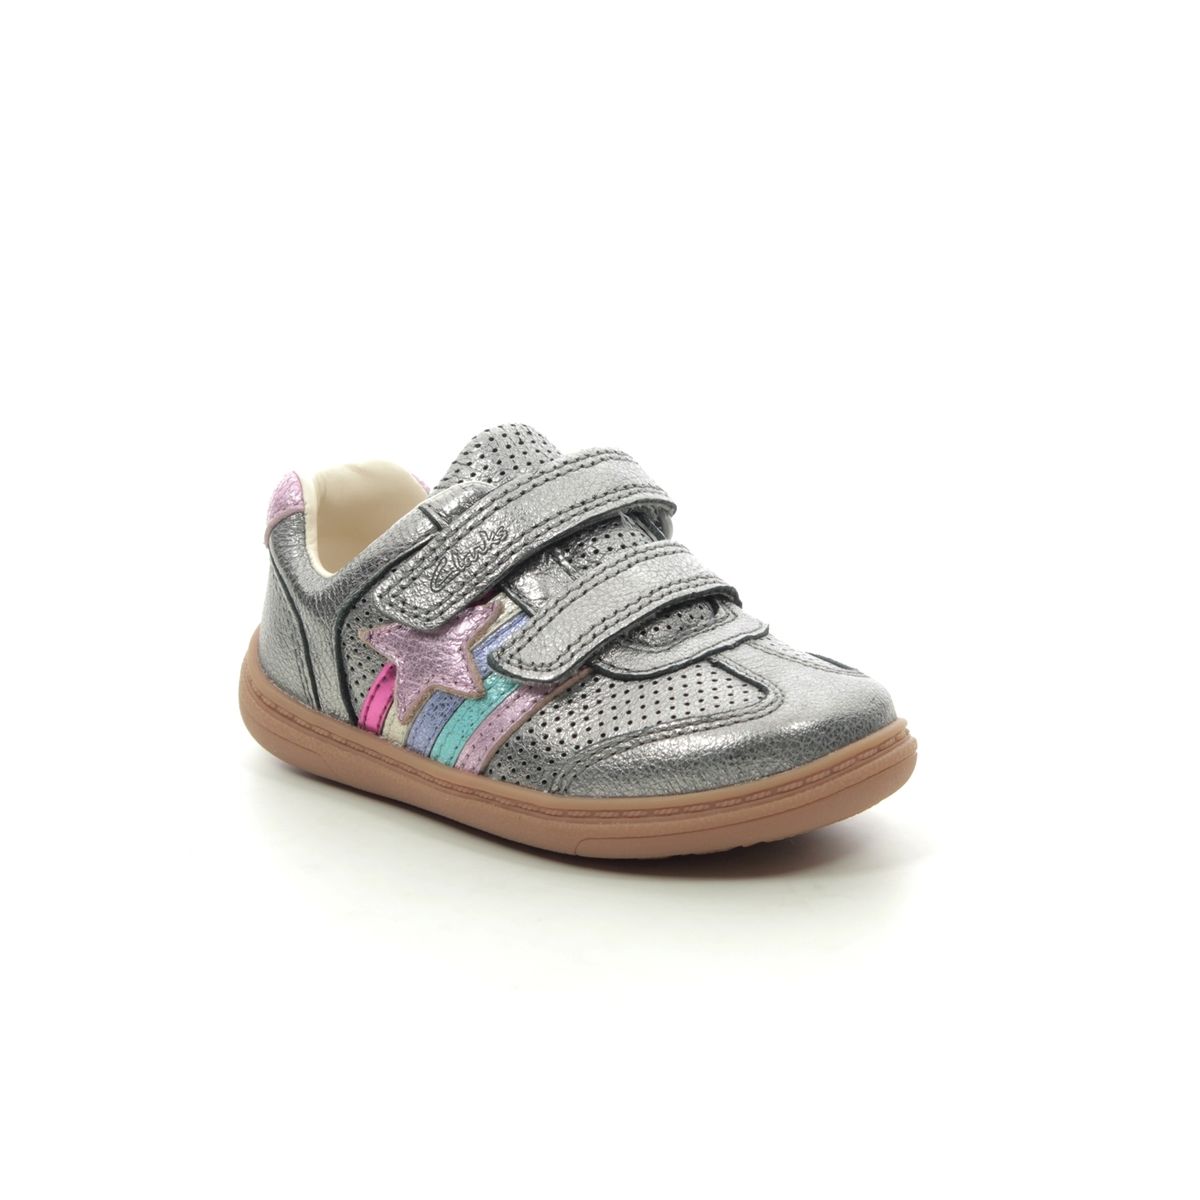 Clarks Flash Heat T F Fit Pewter first 